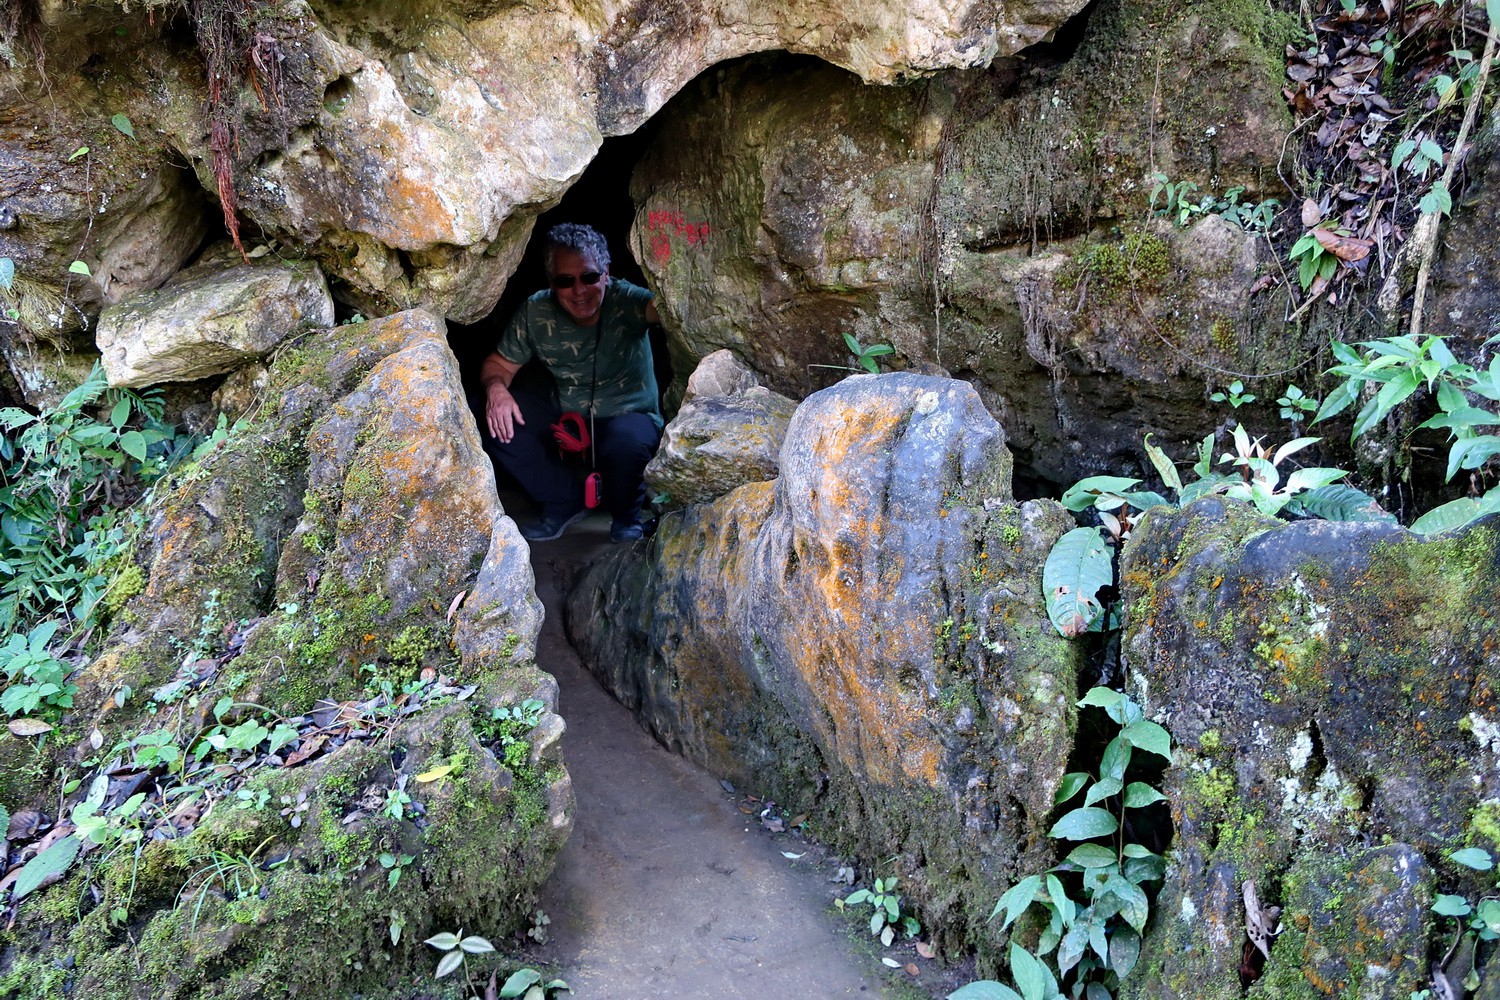 Narrow passage to the shrine on Ham Rong Mountain